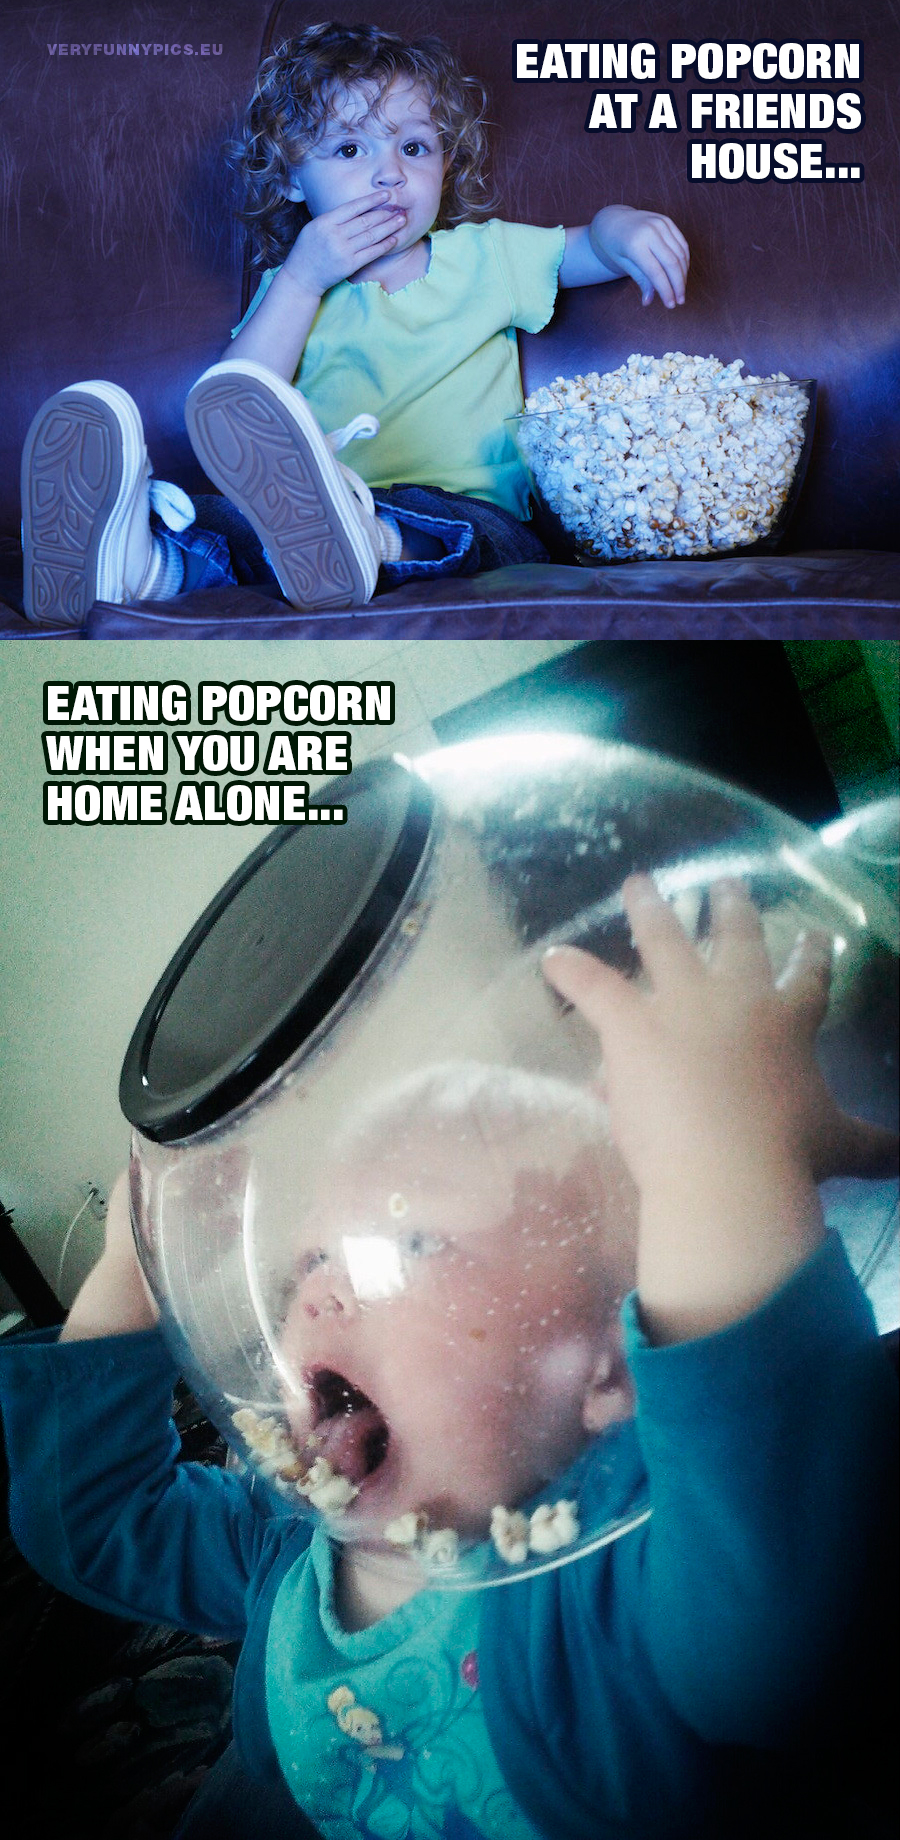 Kids eating popcorn - Eating popcorn at a friends house VS Eating popcorn when you are home alone